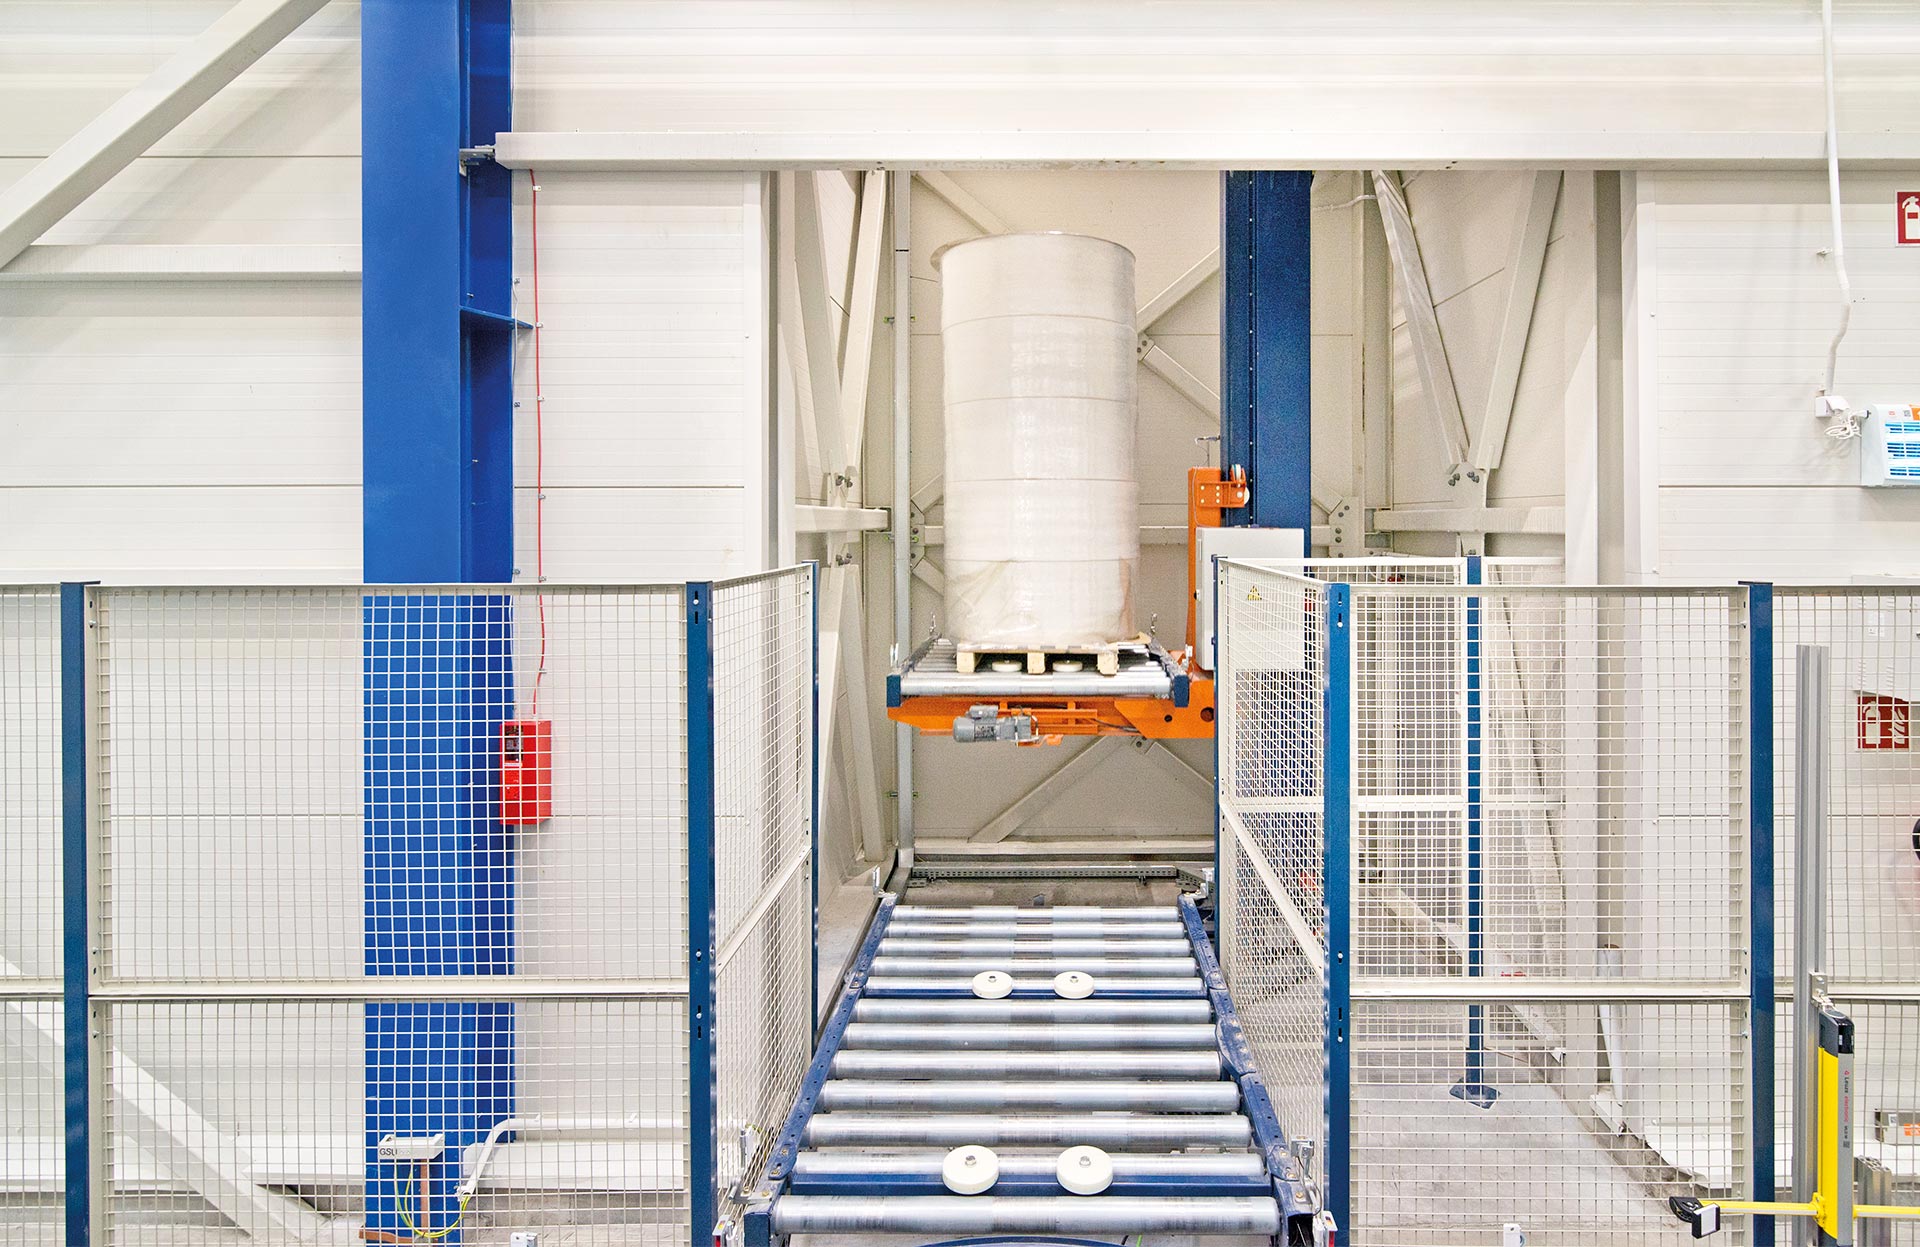 Vertical conveyors can handle various types of palletised loads